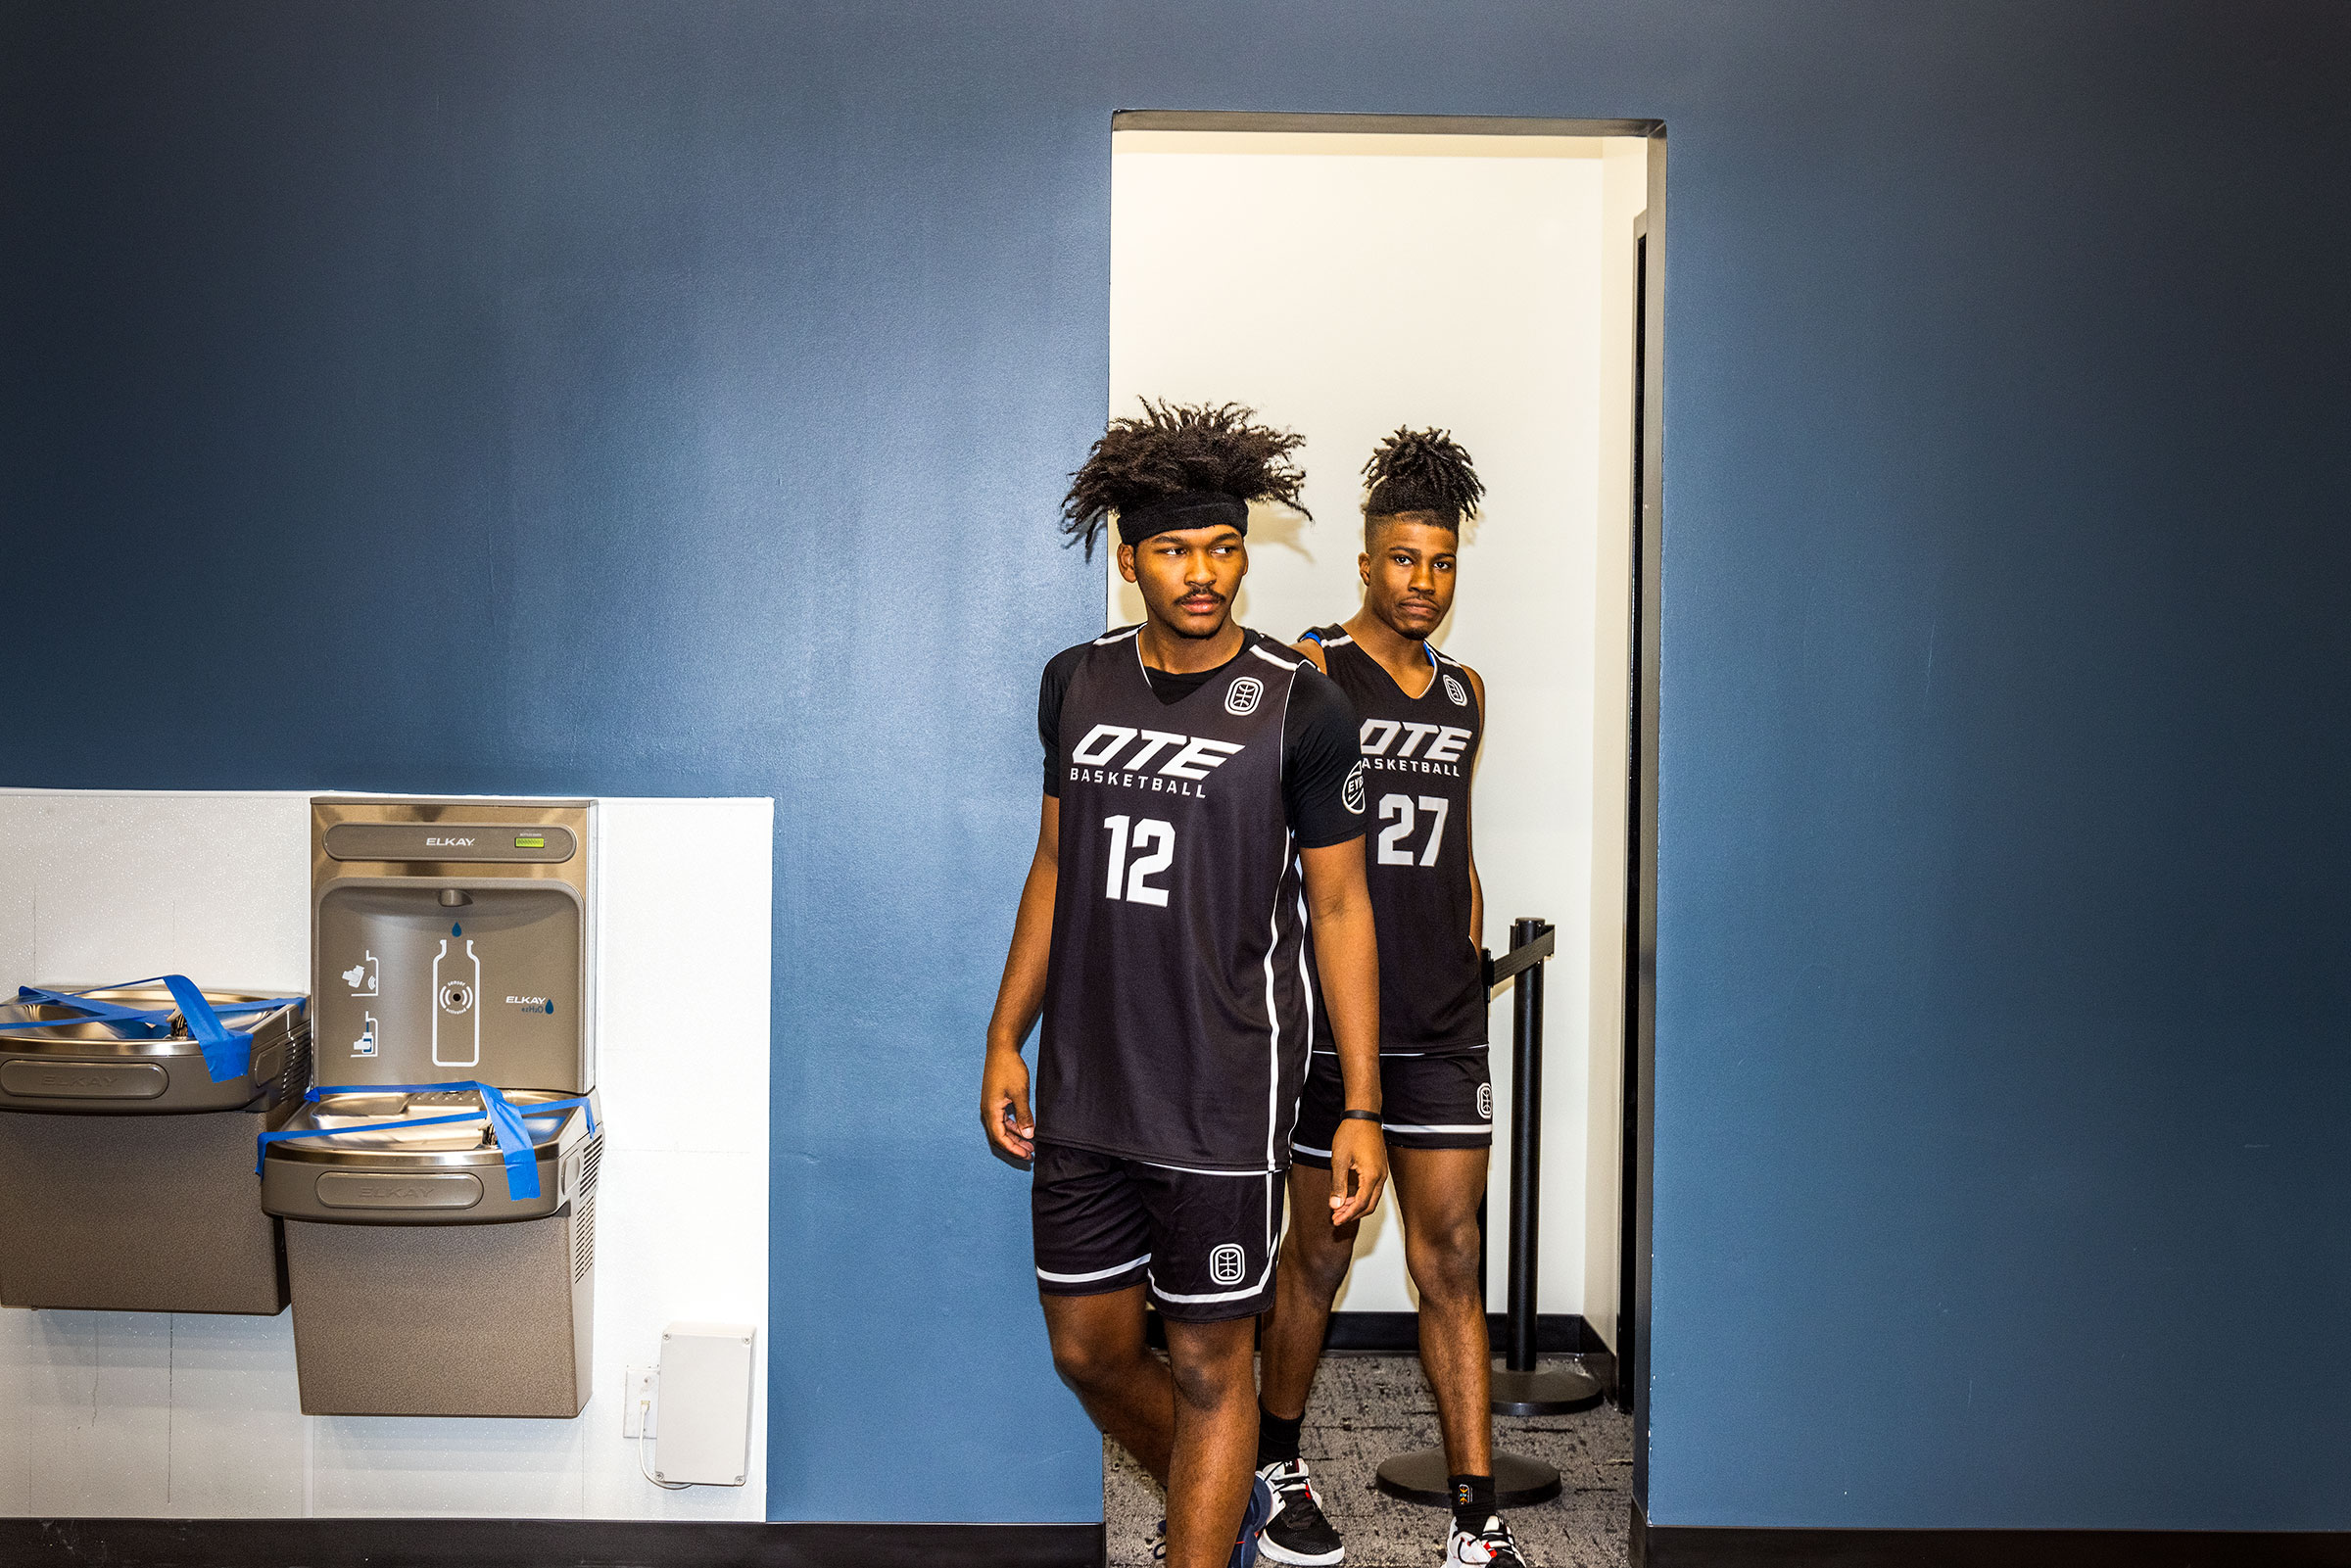 Bryce Griggs and TJ Clark leave the locker room on to the OTE practice courts in Atlanta. (Andrew Hetherington for TIME)